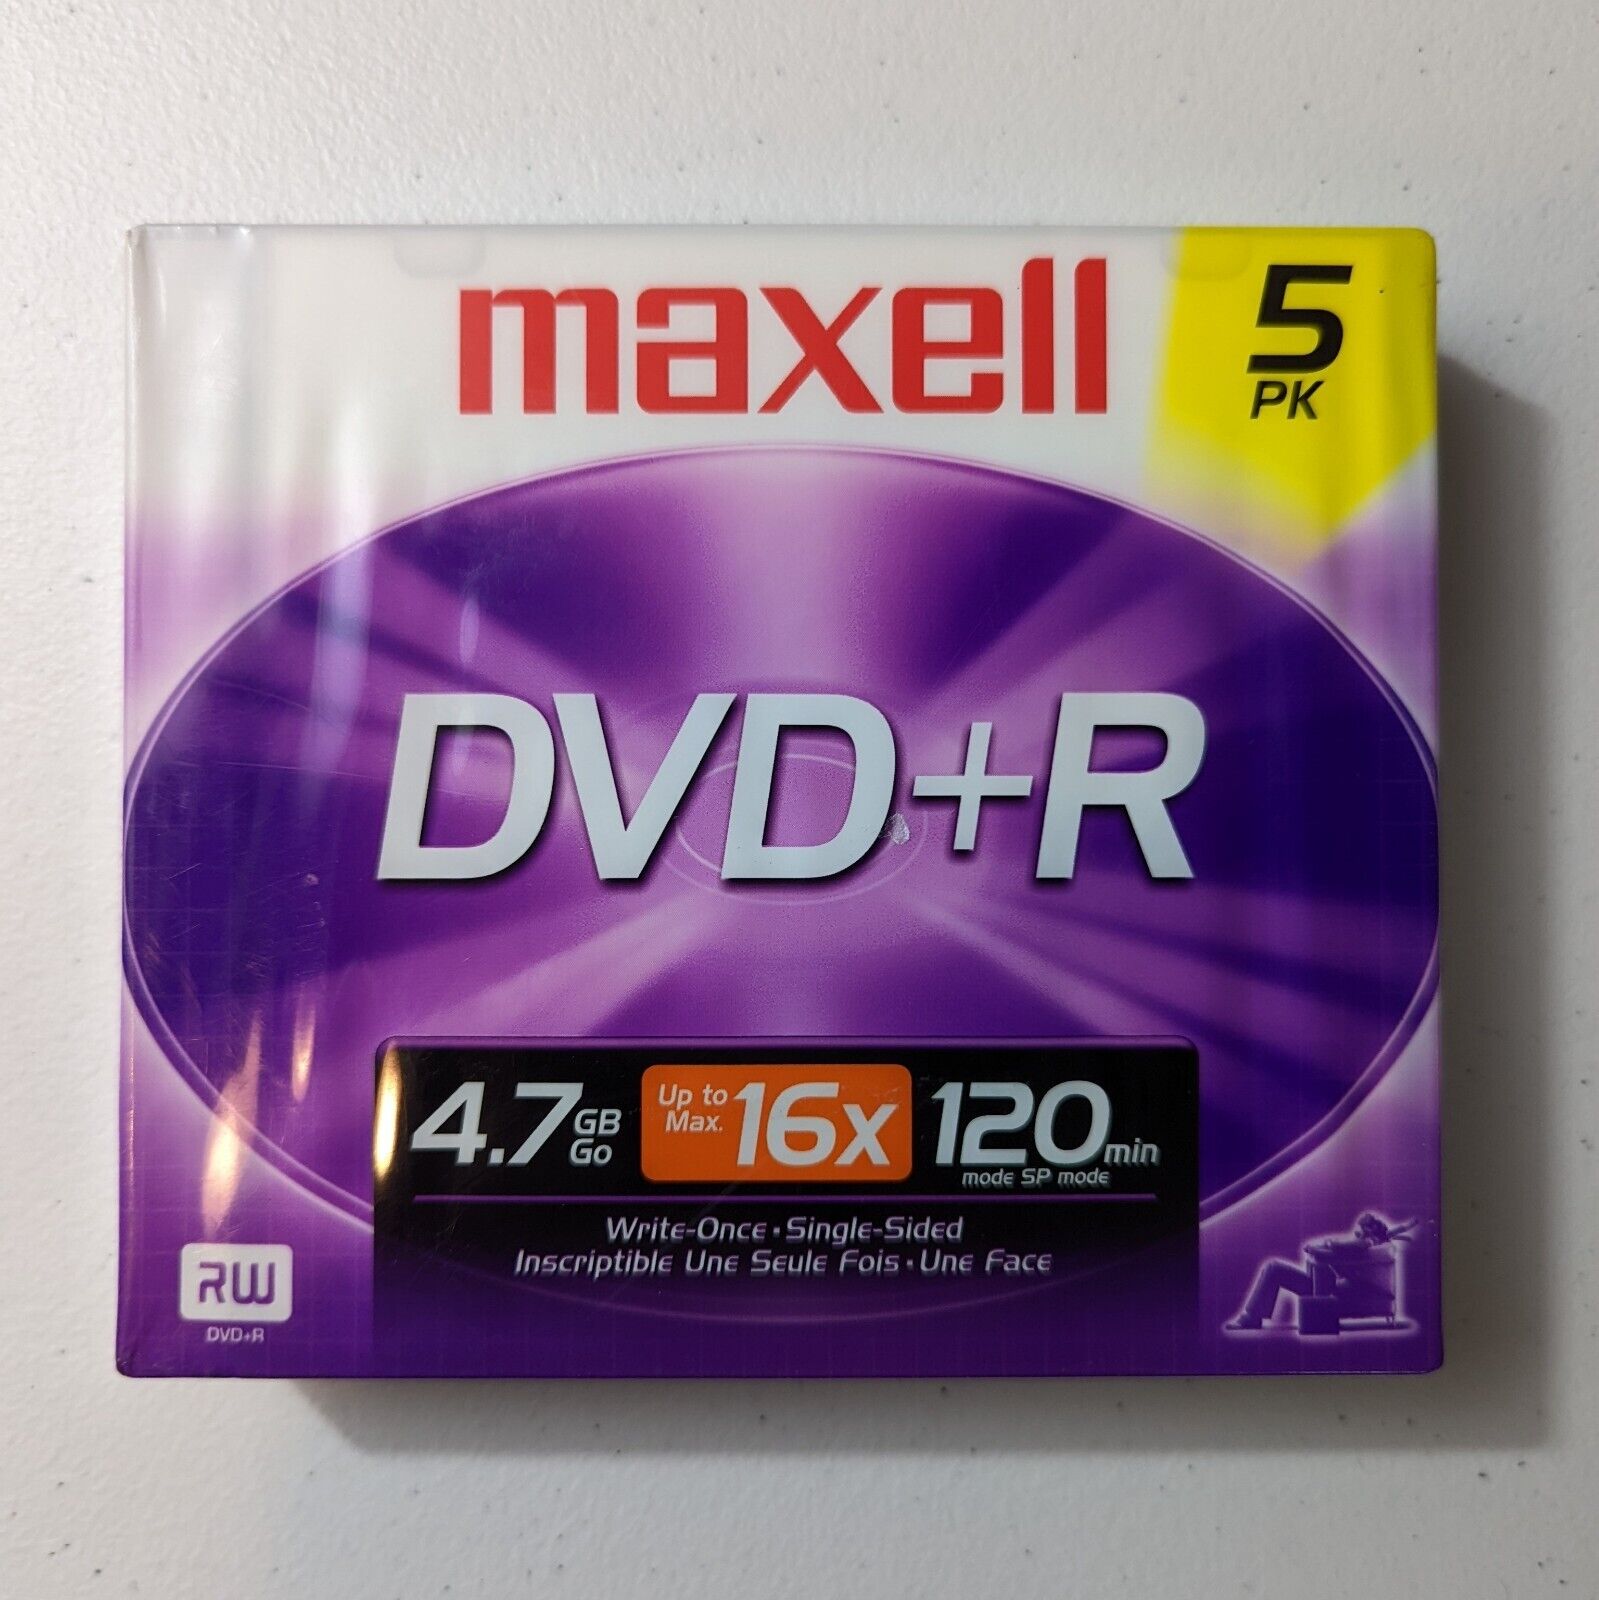 NEW Maxell  4.7 GB DVD+R 5 Pack pk DVD-R 120 minutes up to max 16x music video